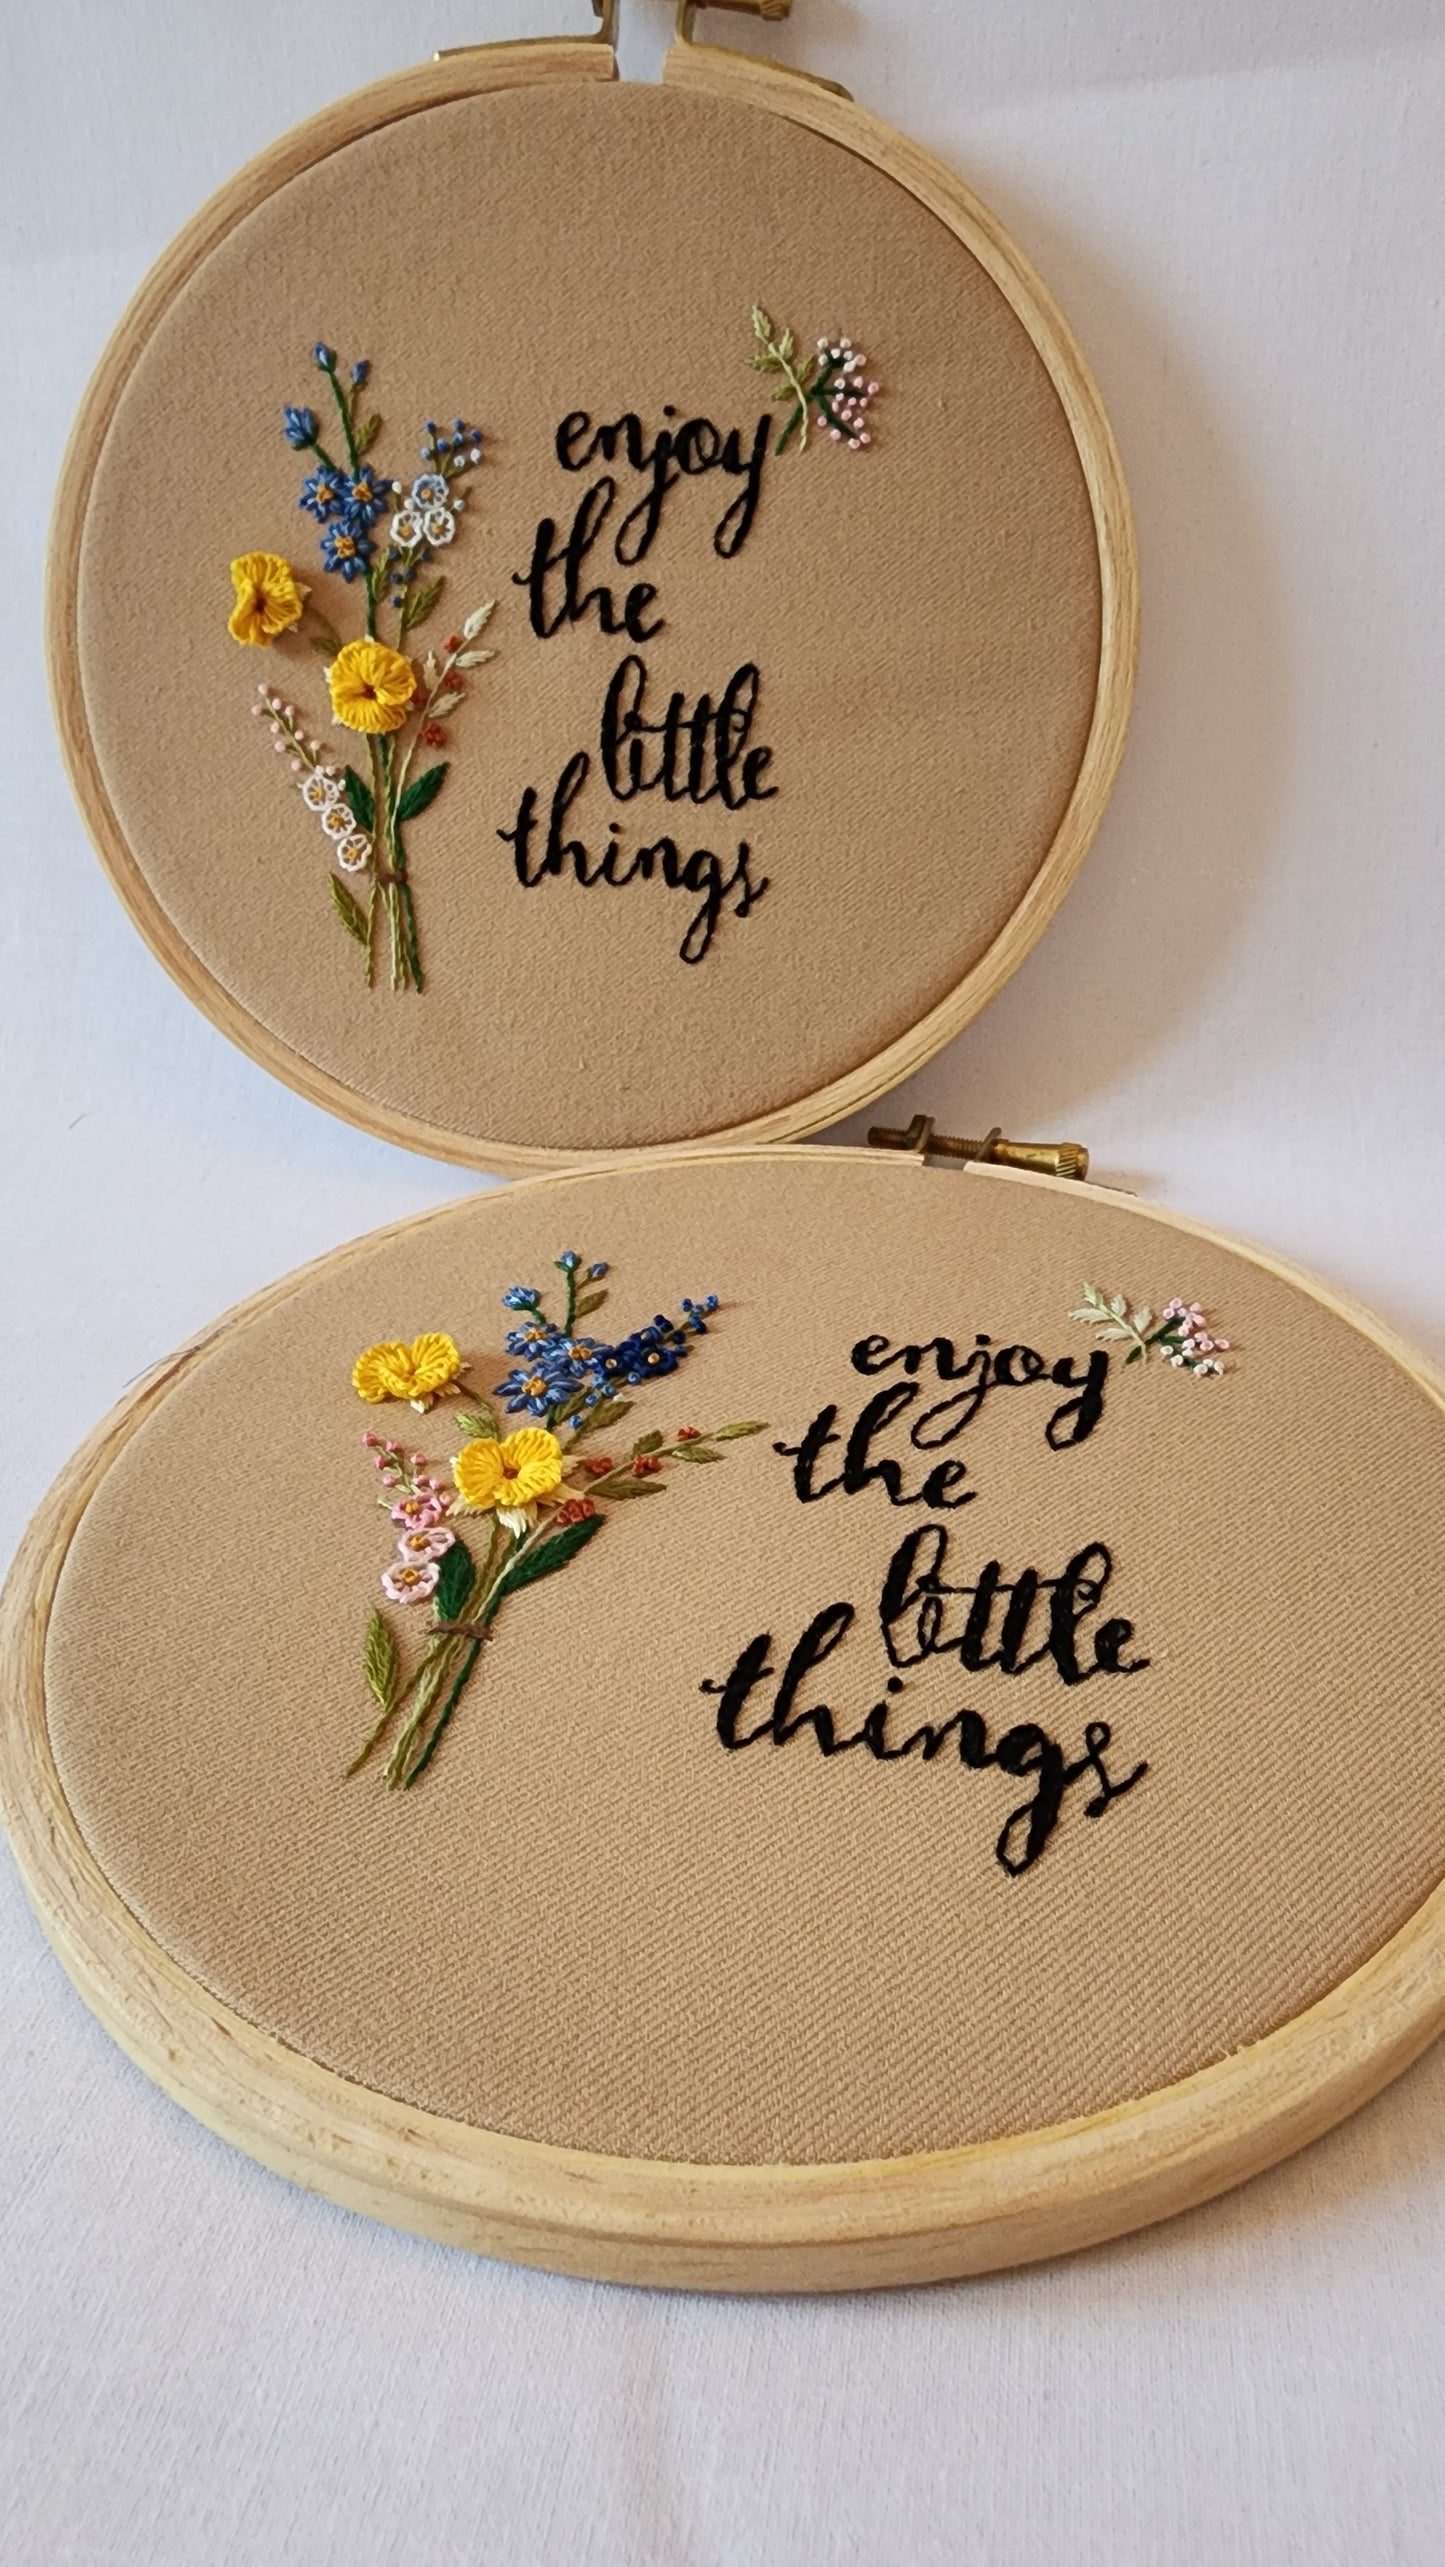 Ikali - Little Things - Hand-embroidered Wall-hanging Hoop